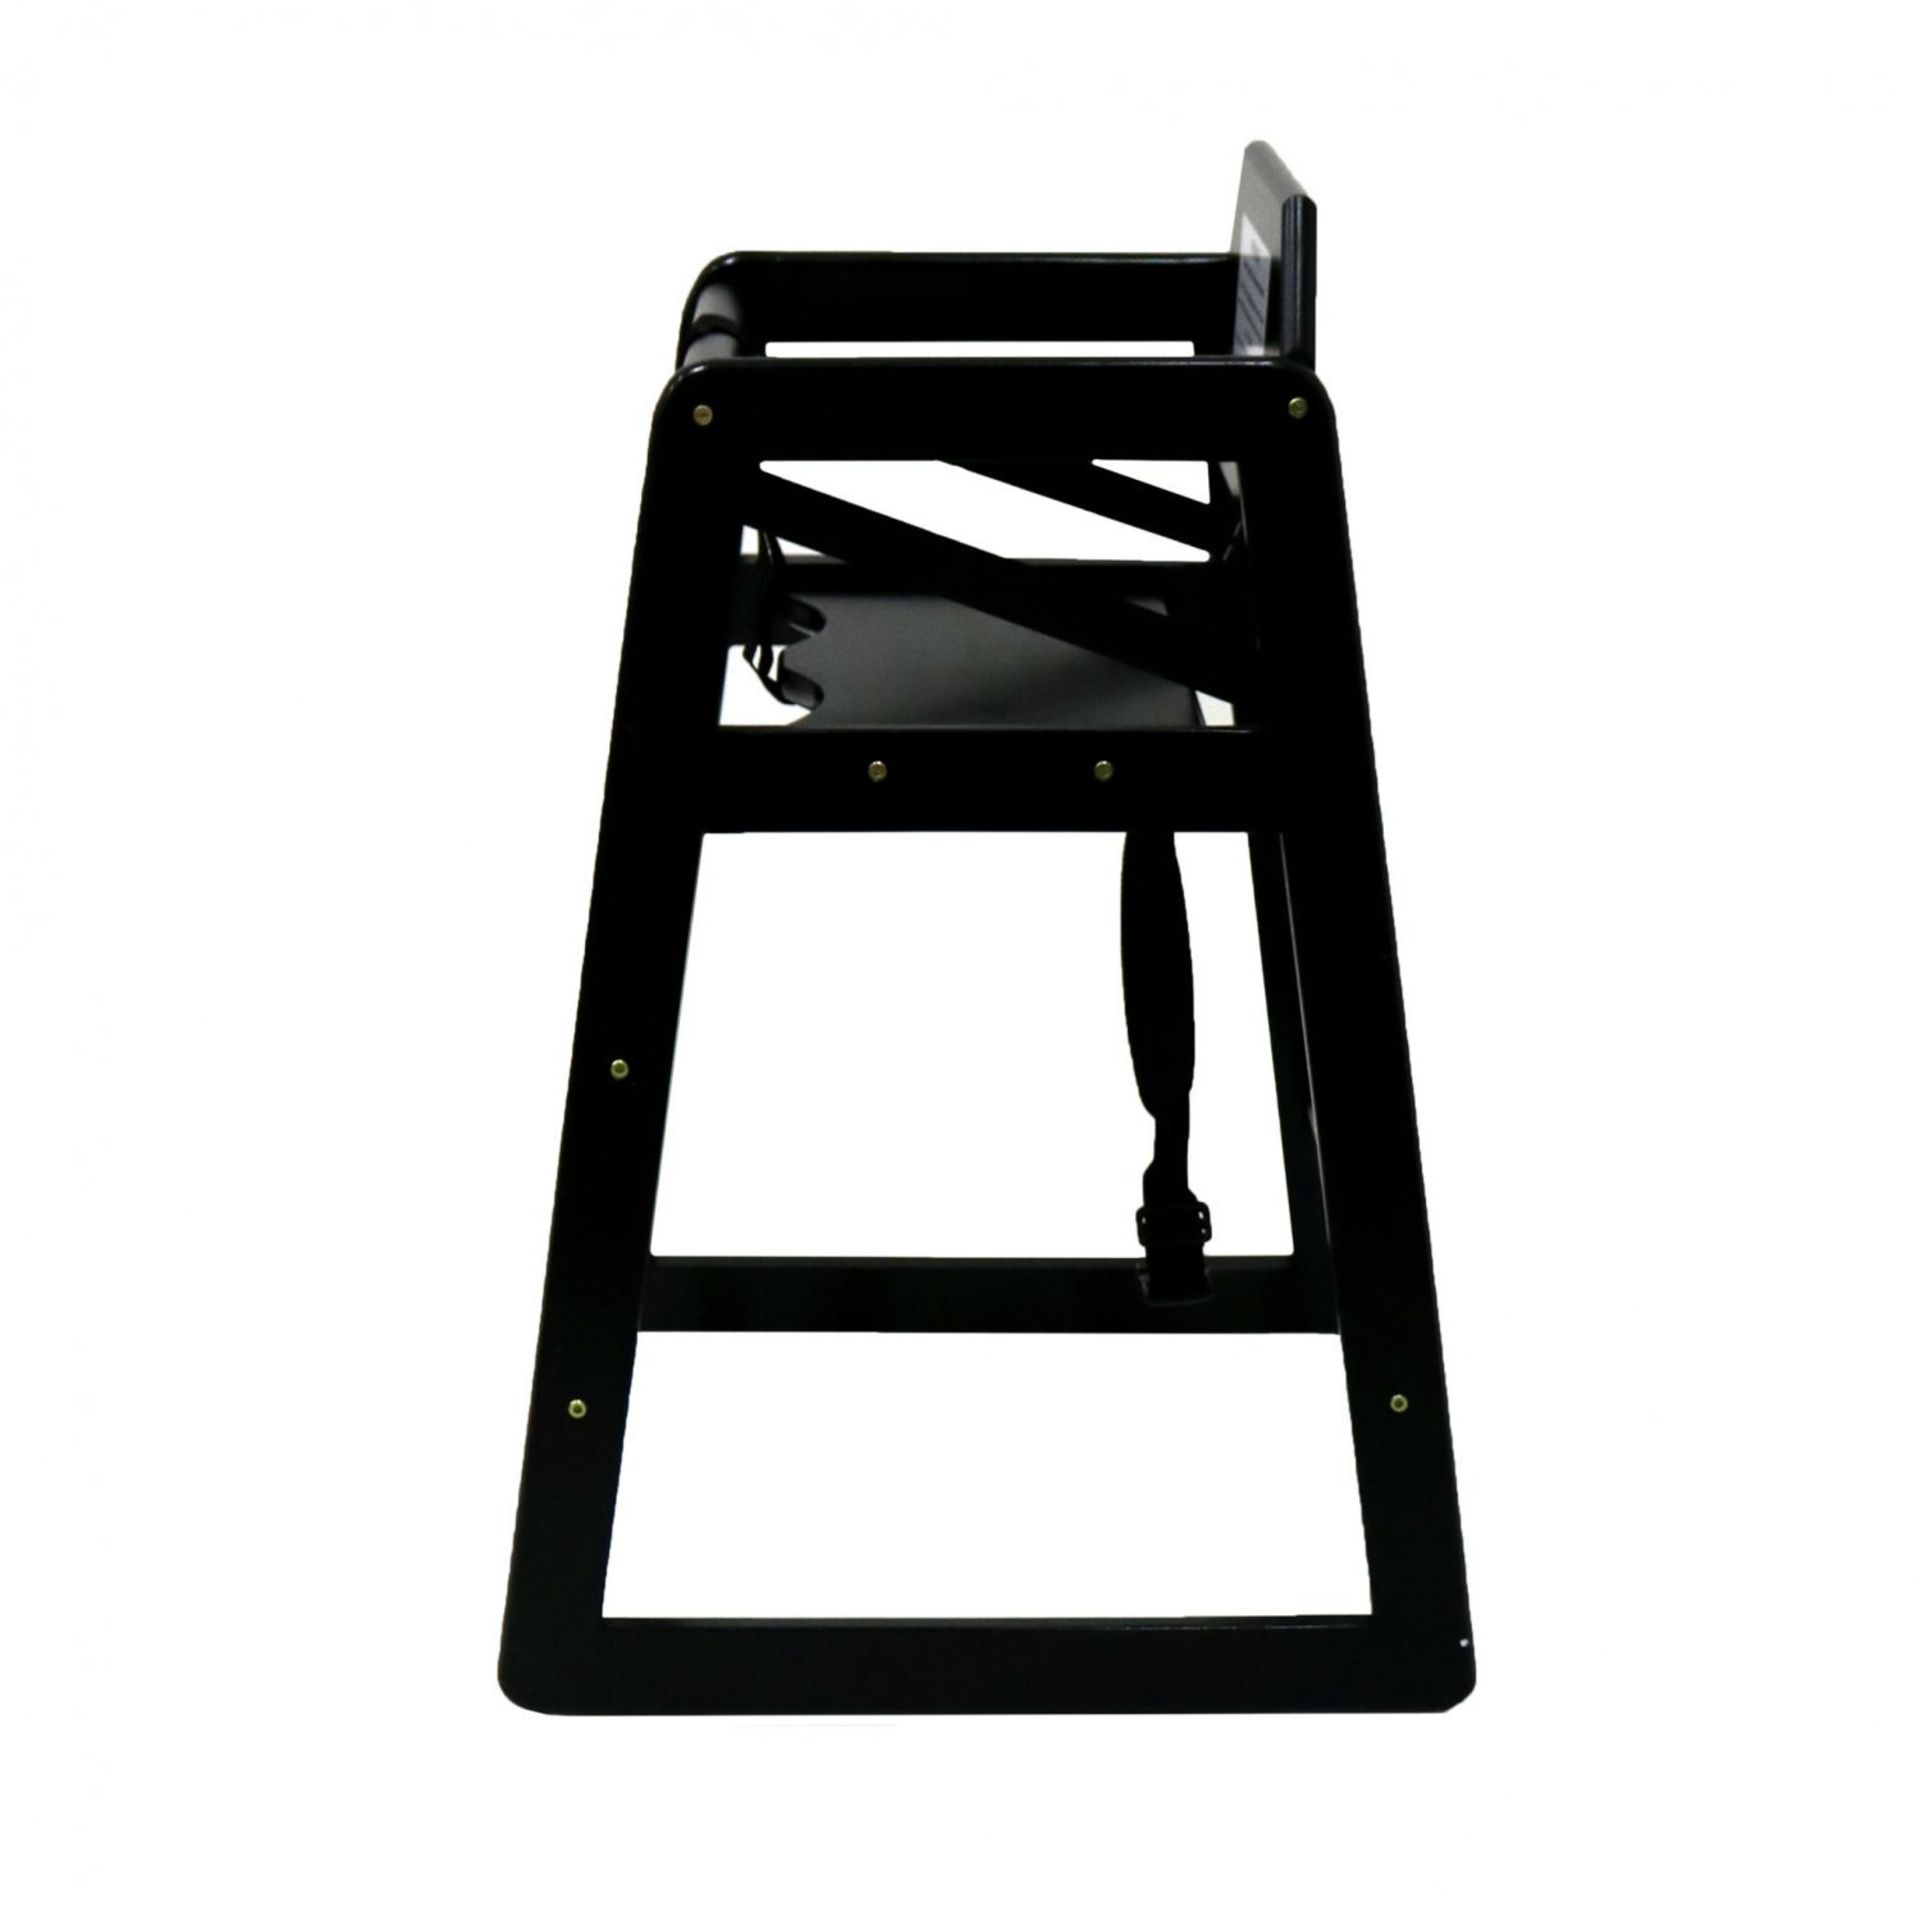 (KK190) Kids Wooden High Chair - Black Wooden high chairs are great for both home and c... - Image 2 of 2